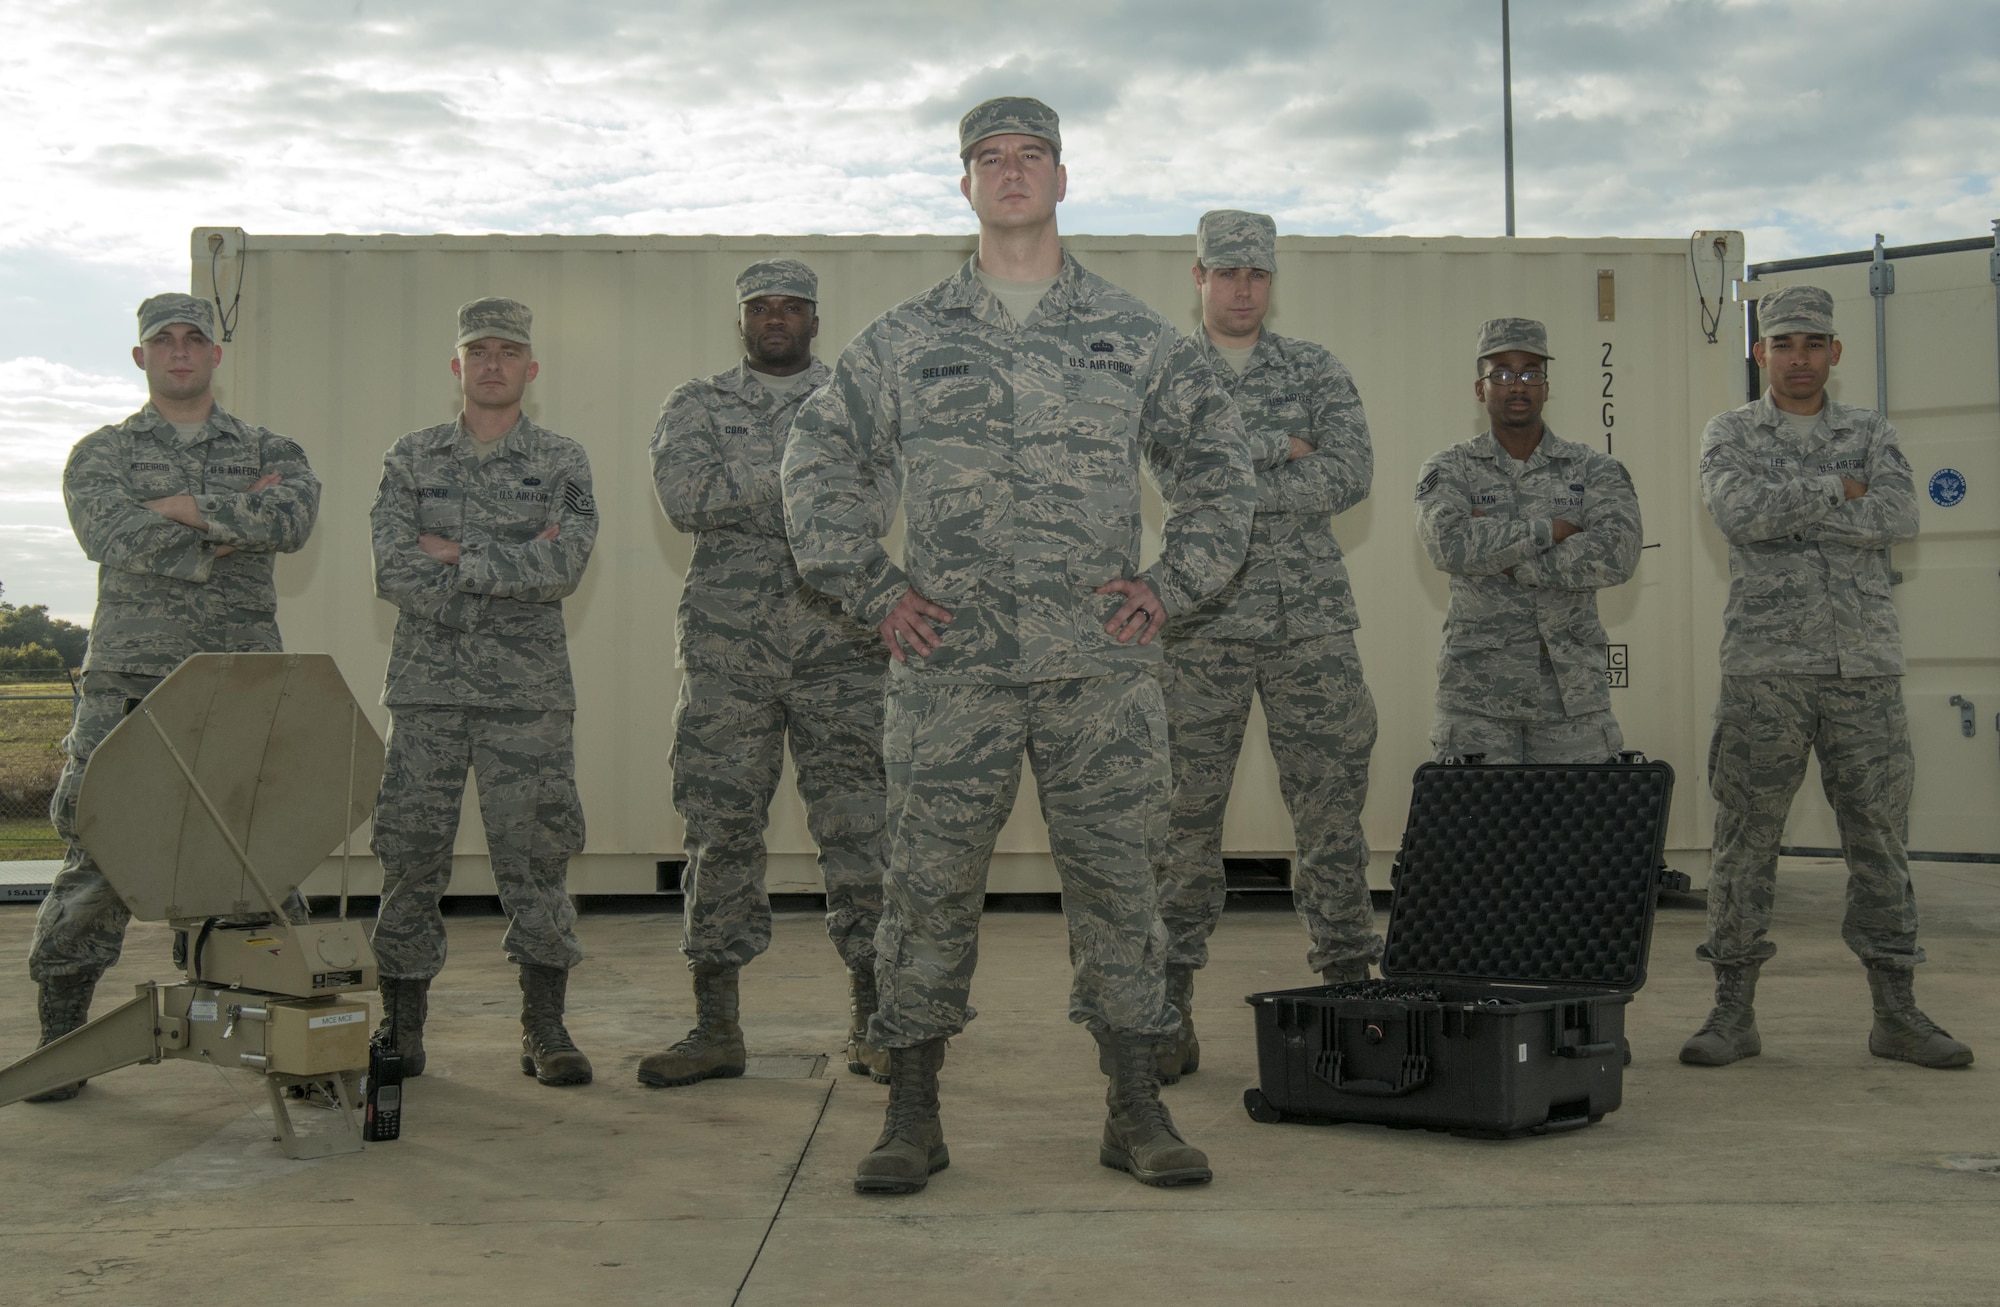 Tech. Sgt. Jeffrey Selonke, center, the section chief of network integration assigned to the 6th Communications Squadron, pauses for a photo with his team at MacDill Air Force Base, Fla., Jan. 11, 2017. Selonke won the 2016 Air Force Information Dominance Outstanding Cyber Systems NCO of the Year award during his time as the section chief of radio frequency transmissions. (U.S. Air Force photo by Airman 1st Class Mariette Adams)